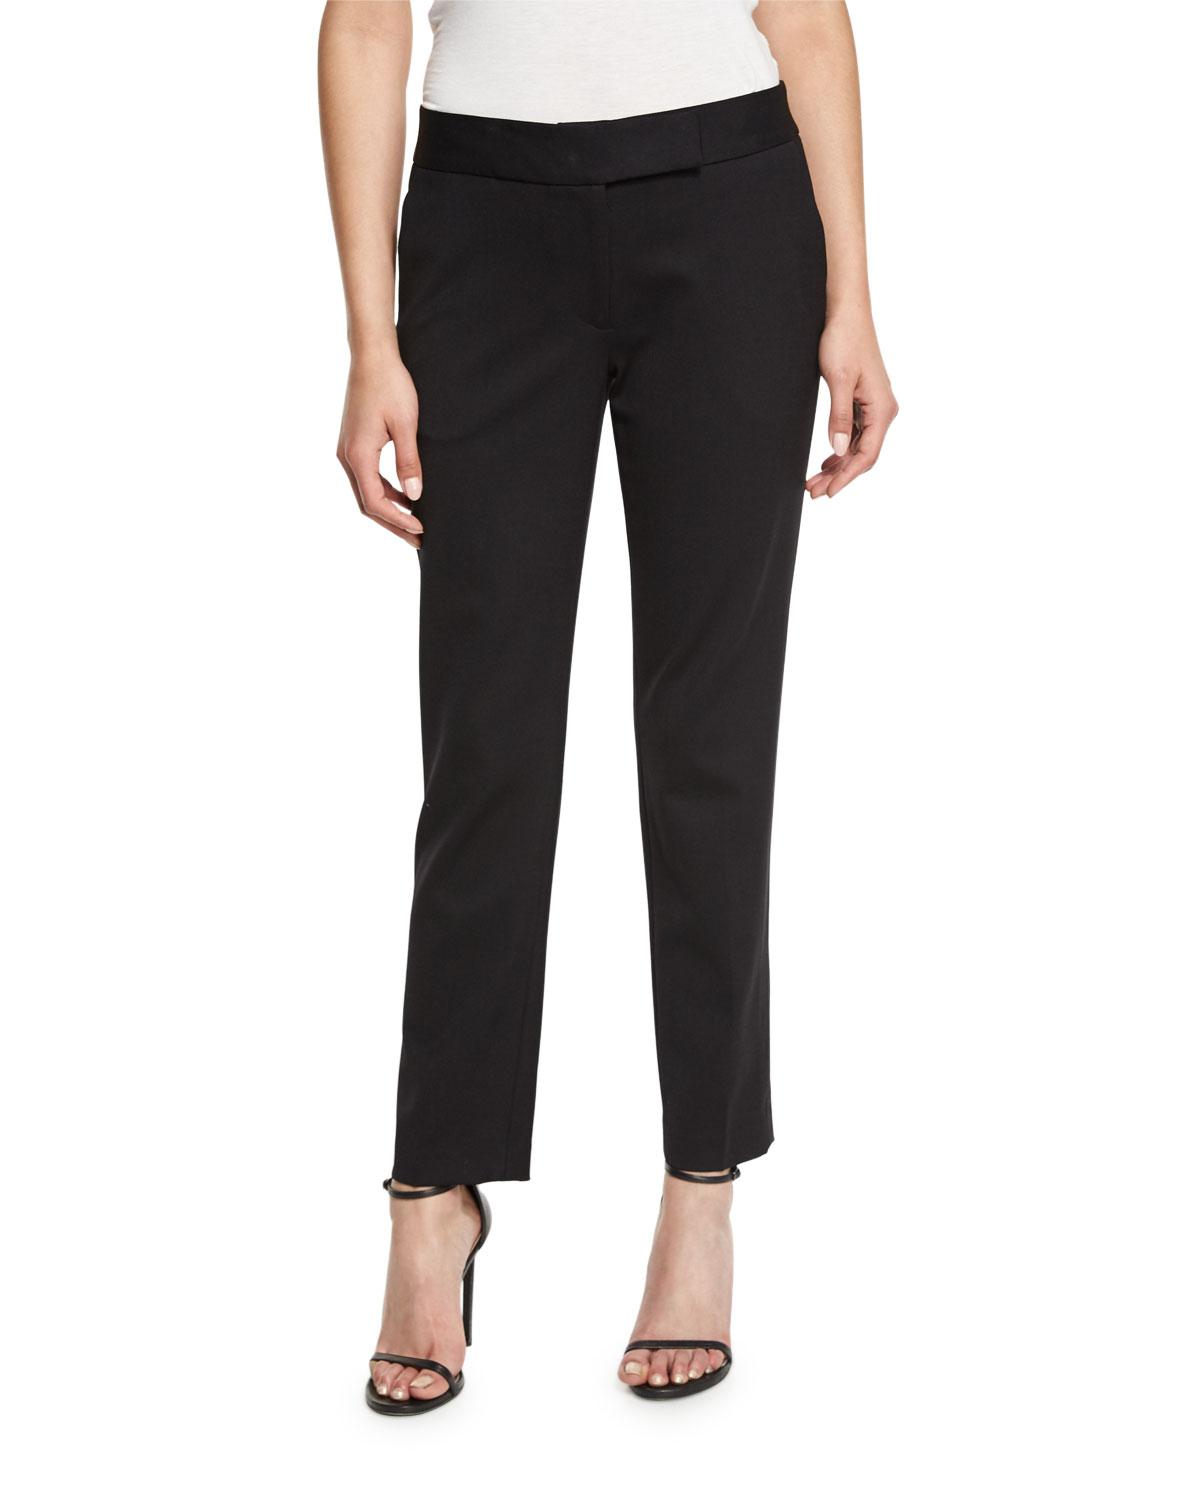 Lyst - Milly Tapered Gabardine Ankle Pants in Black